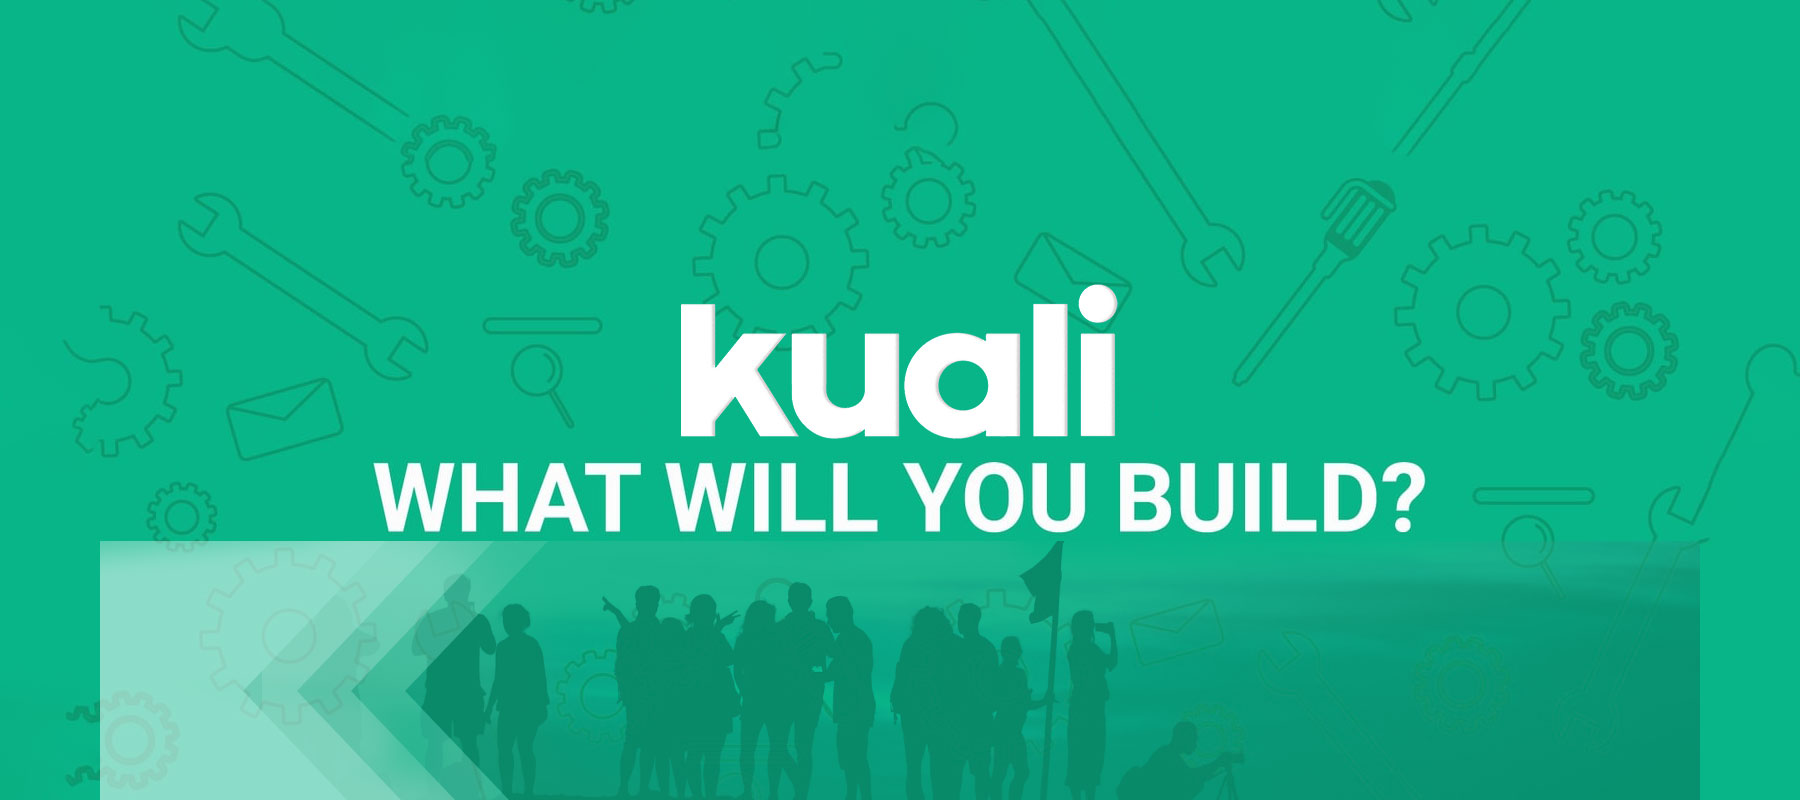 Kuali, What will you build?